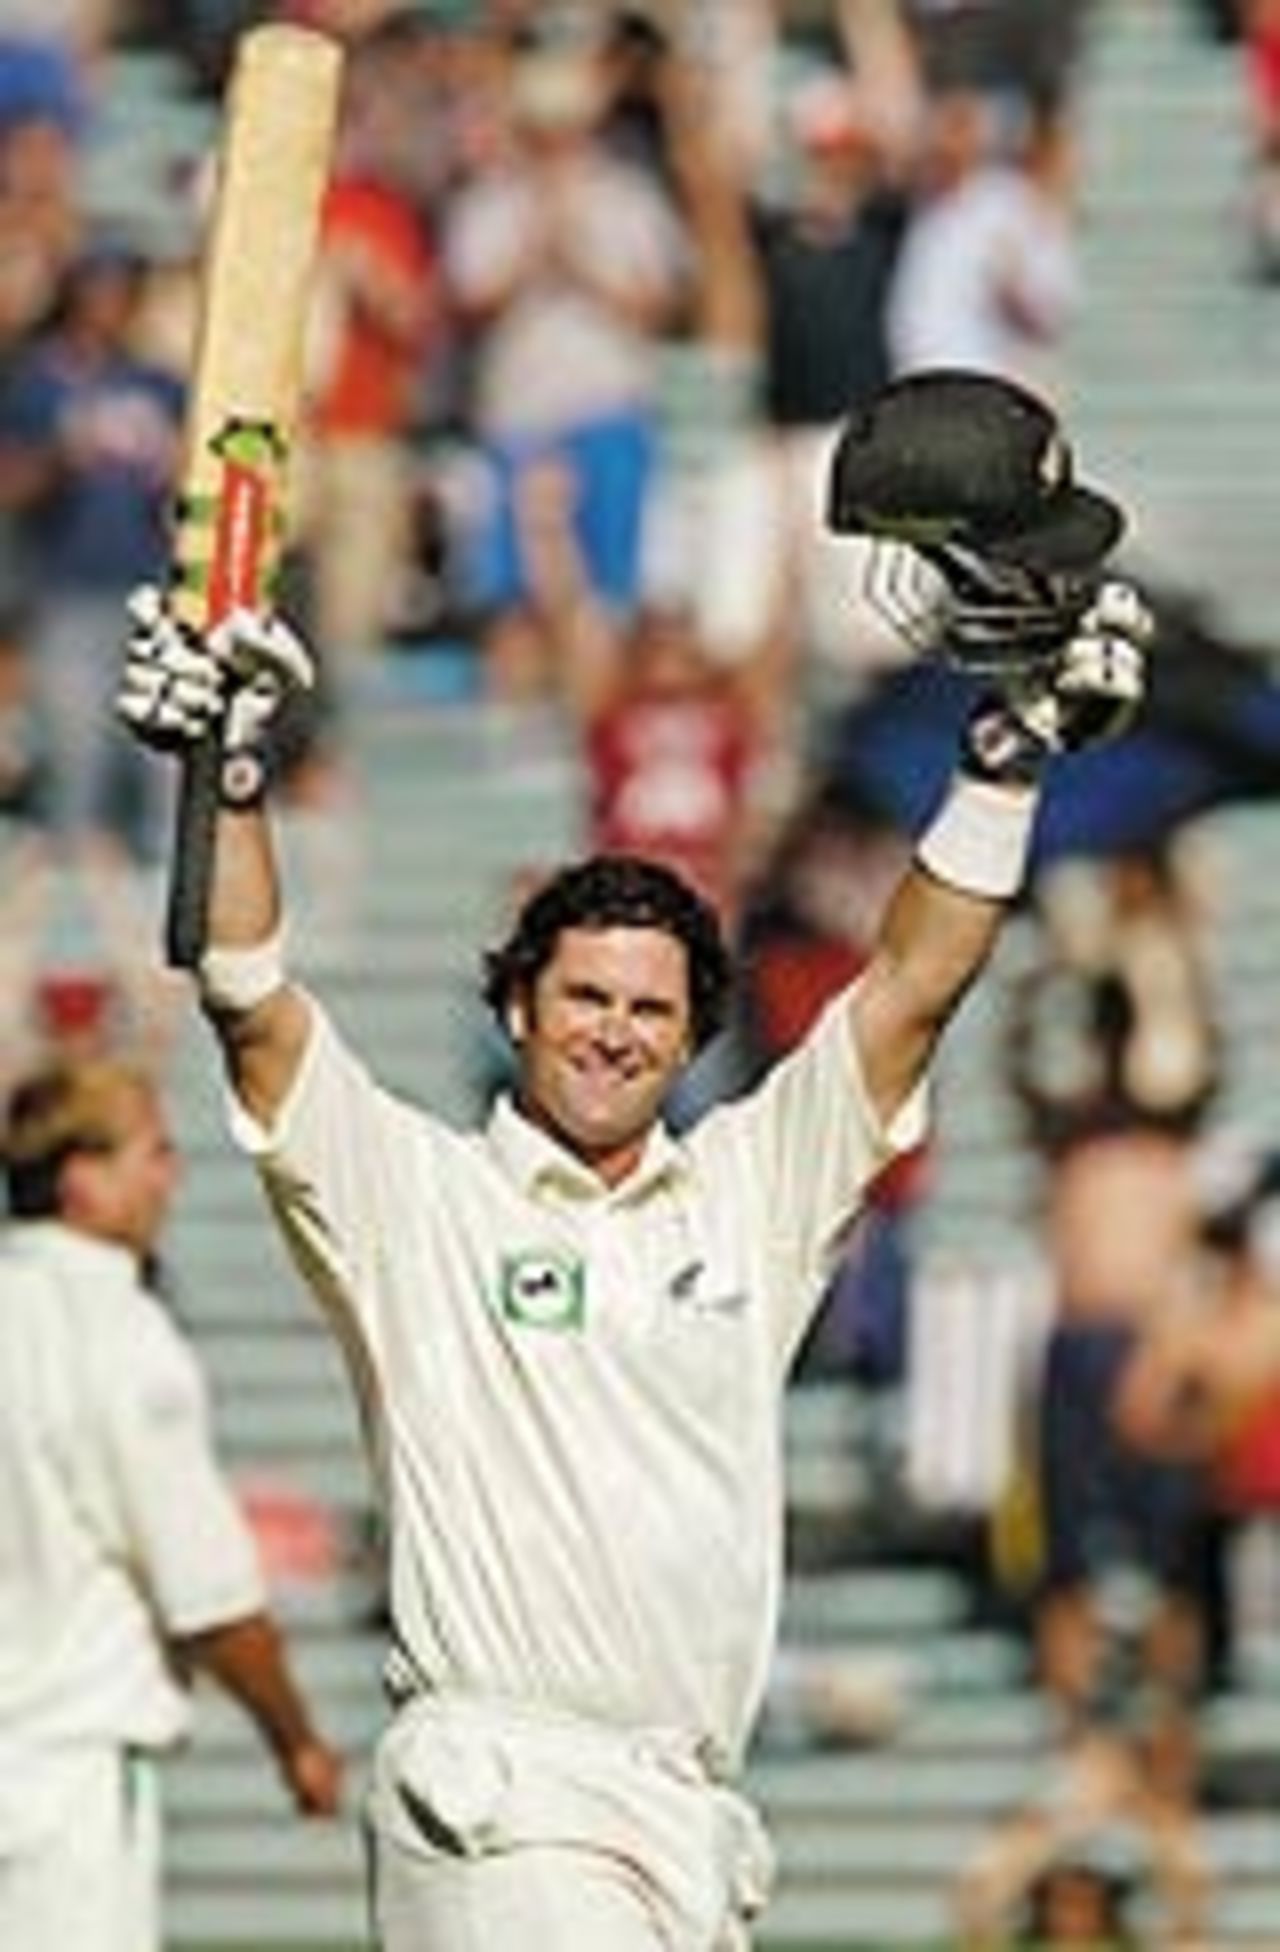 Chris Cairns raises his arms after scoring a century, New Zealand v South Africa, 2nd Test, Auckland, 3rd day, March 20th, 2004